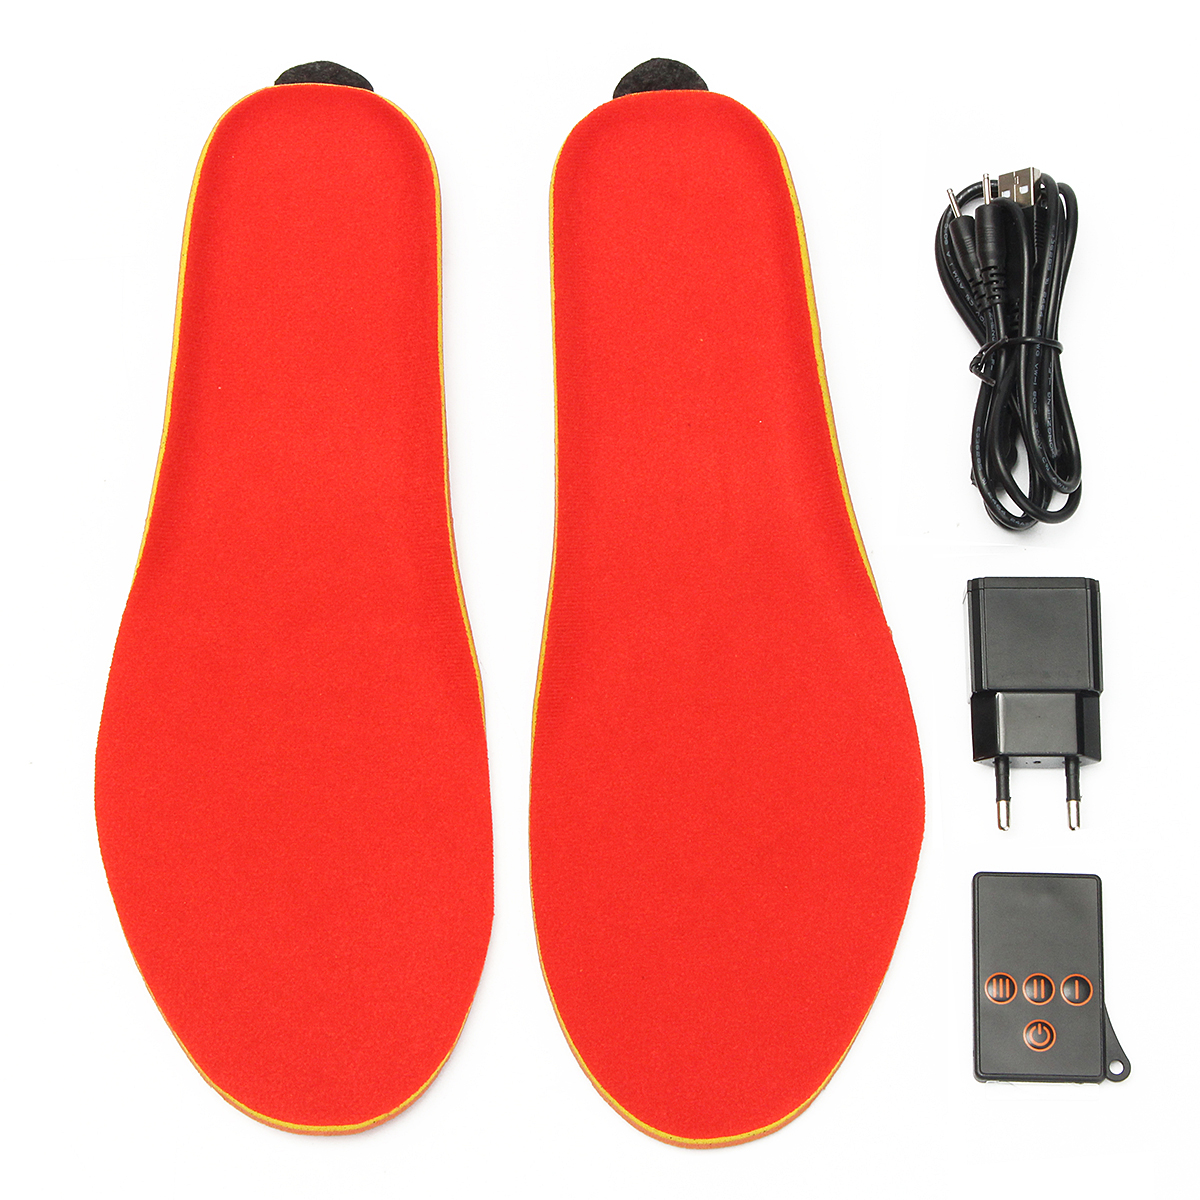 

Remote Rechargeable Shoe Boot Foot Infrared Foot Warmer Thermal Insoles Heated Pads